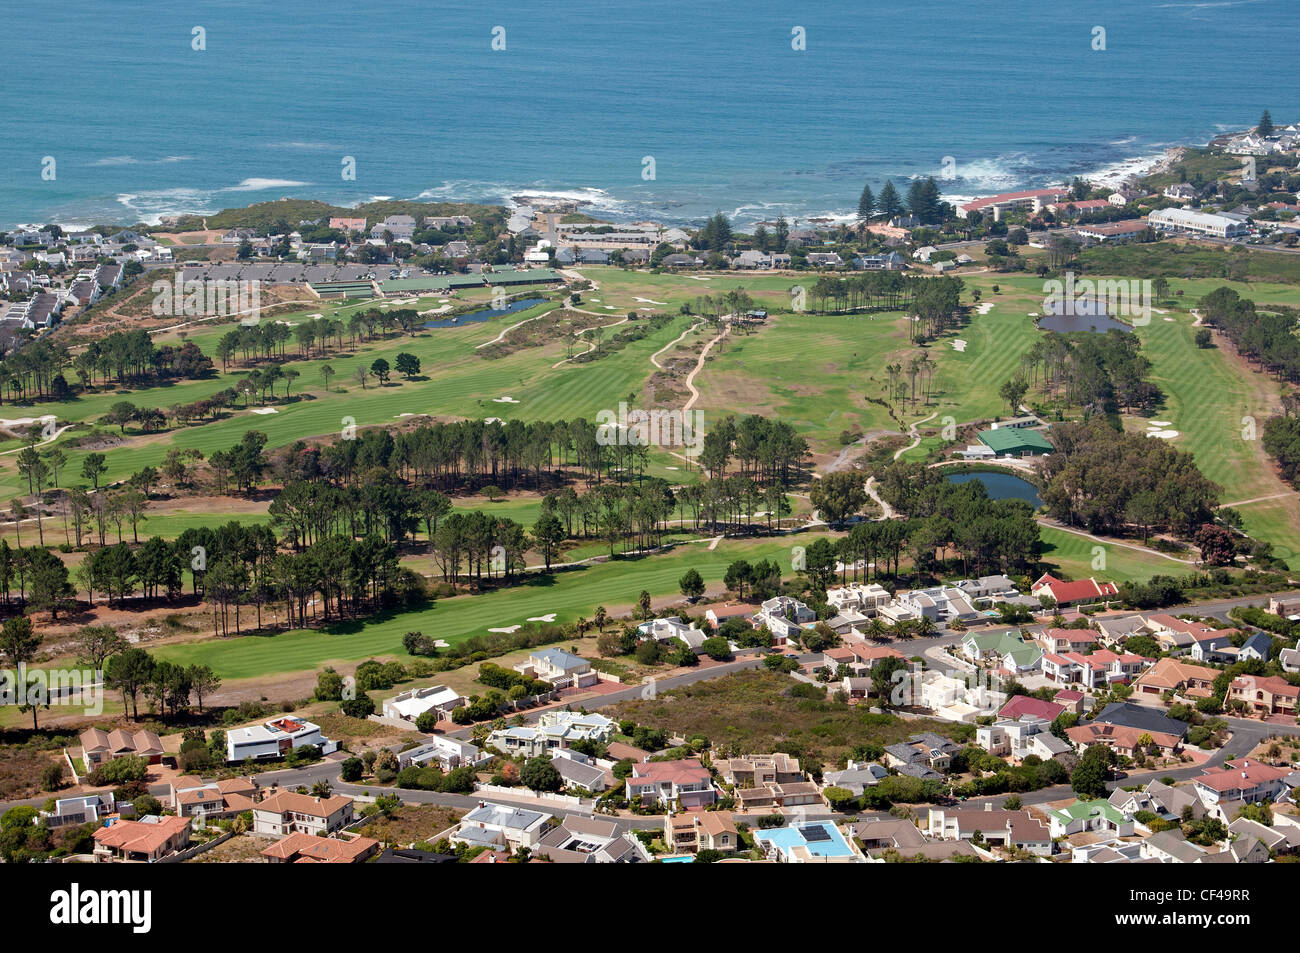 Overview of  Hermanus Golf Course at Hermanus Western Cape South Africa Stock Photo